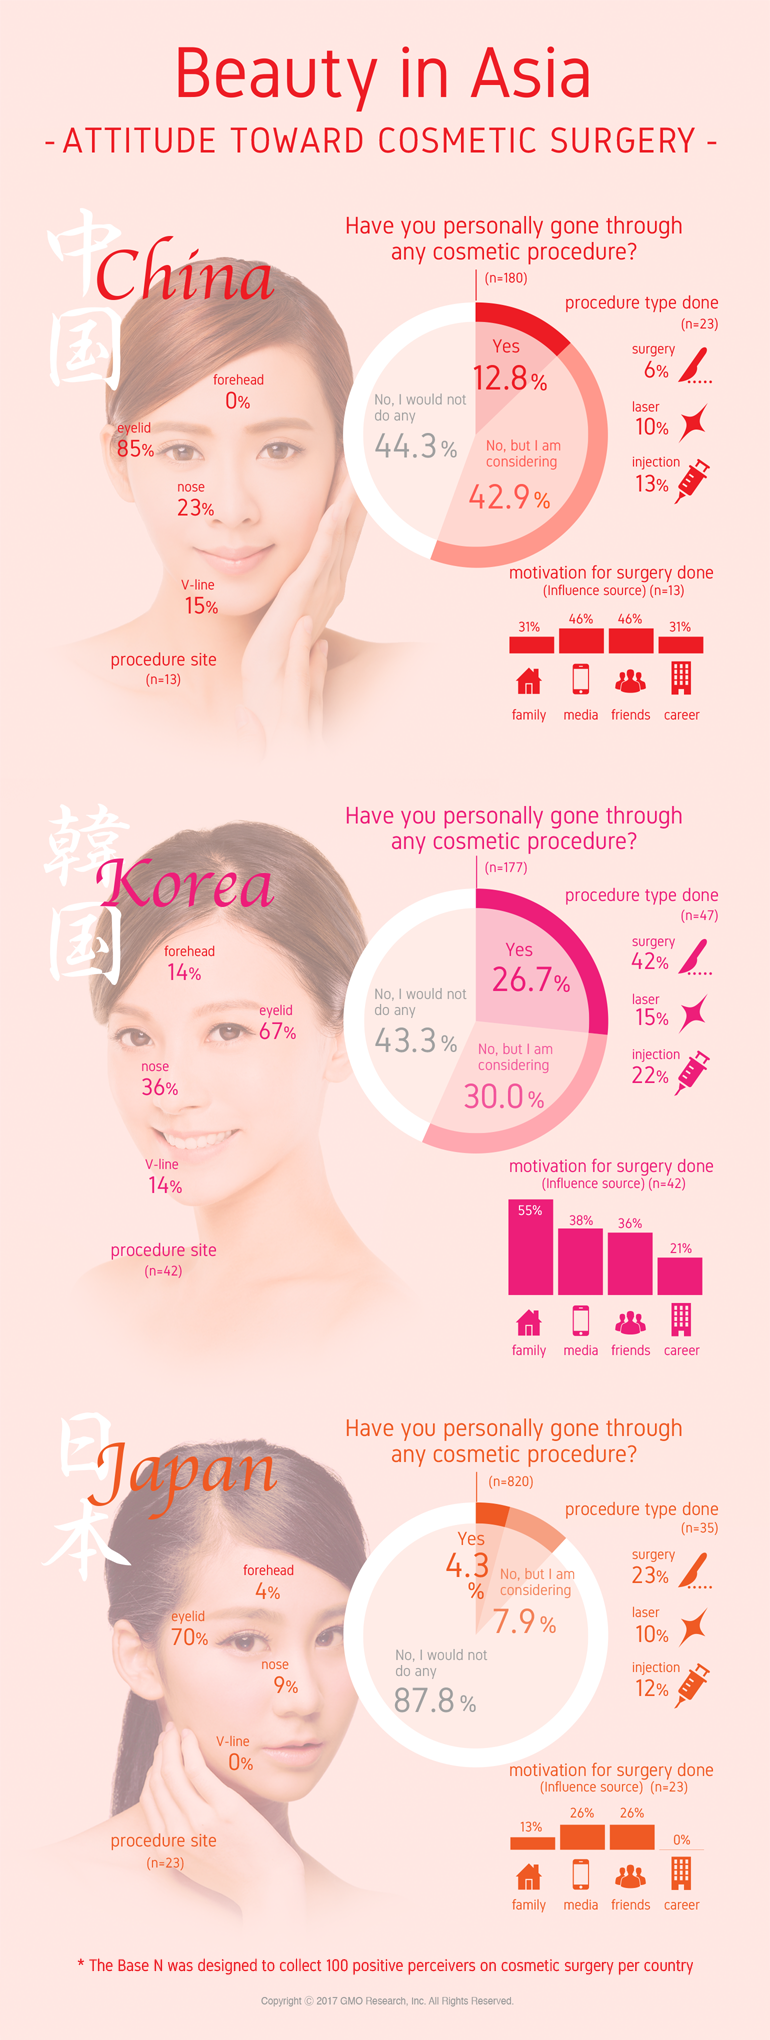 Cosmetic Surgery survey results from China, Korea and Japan